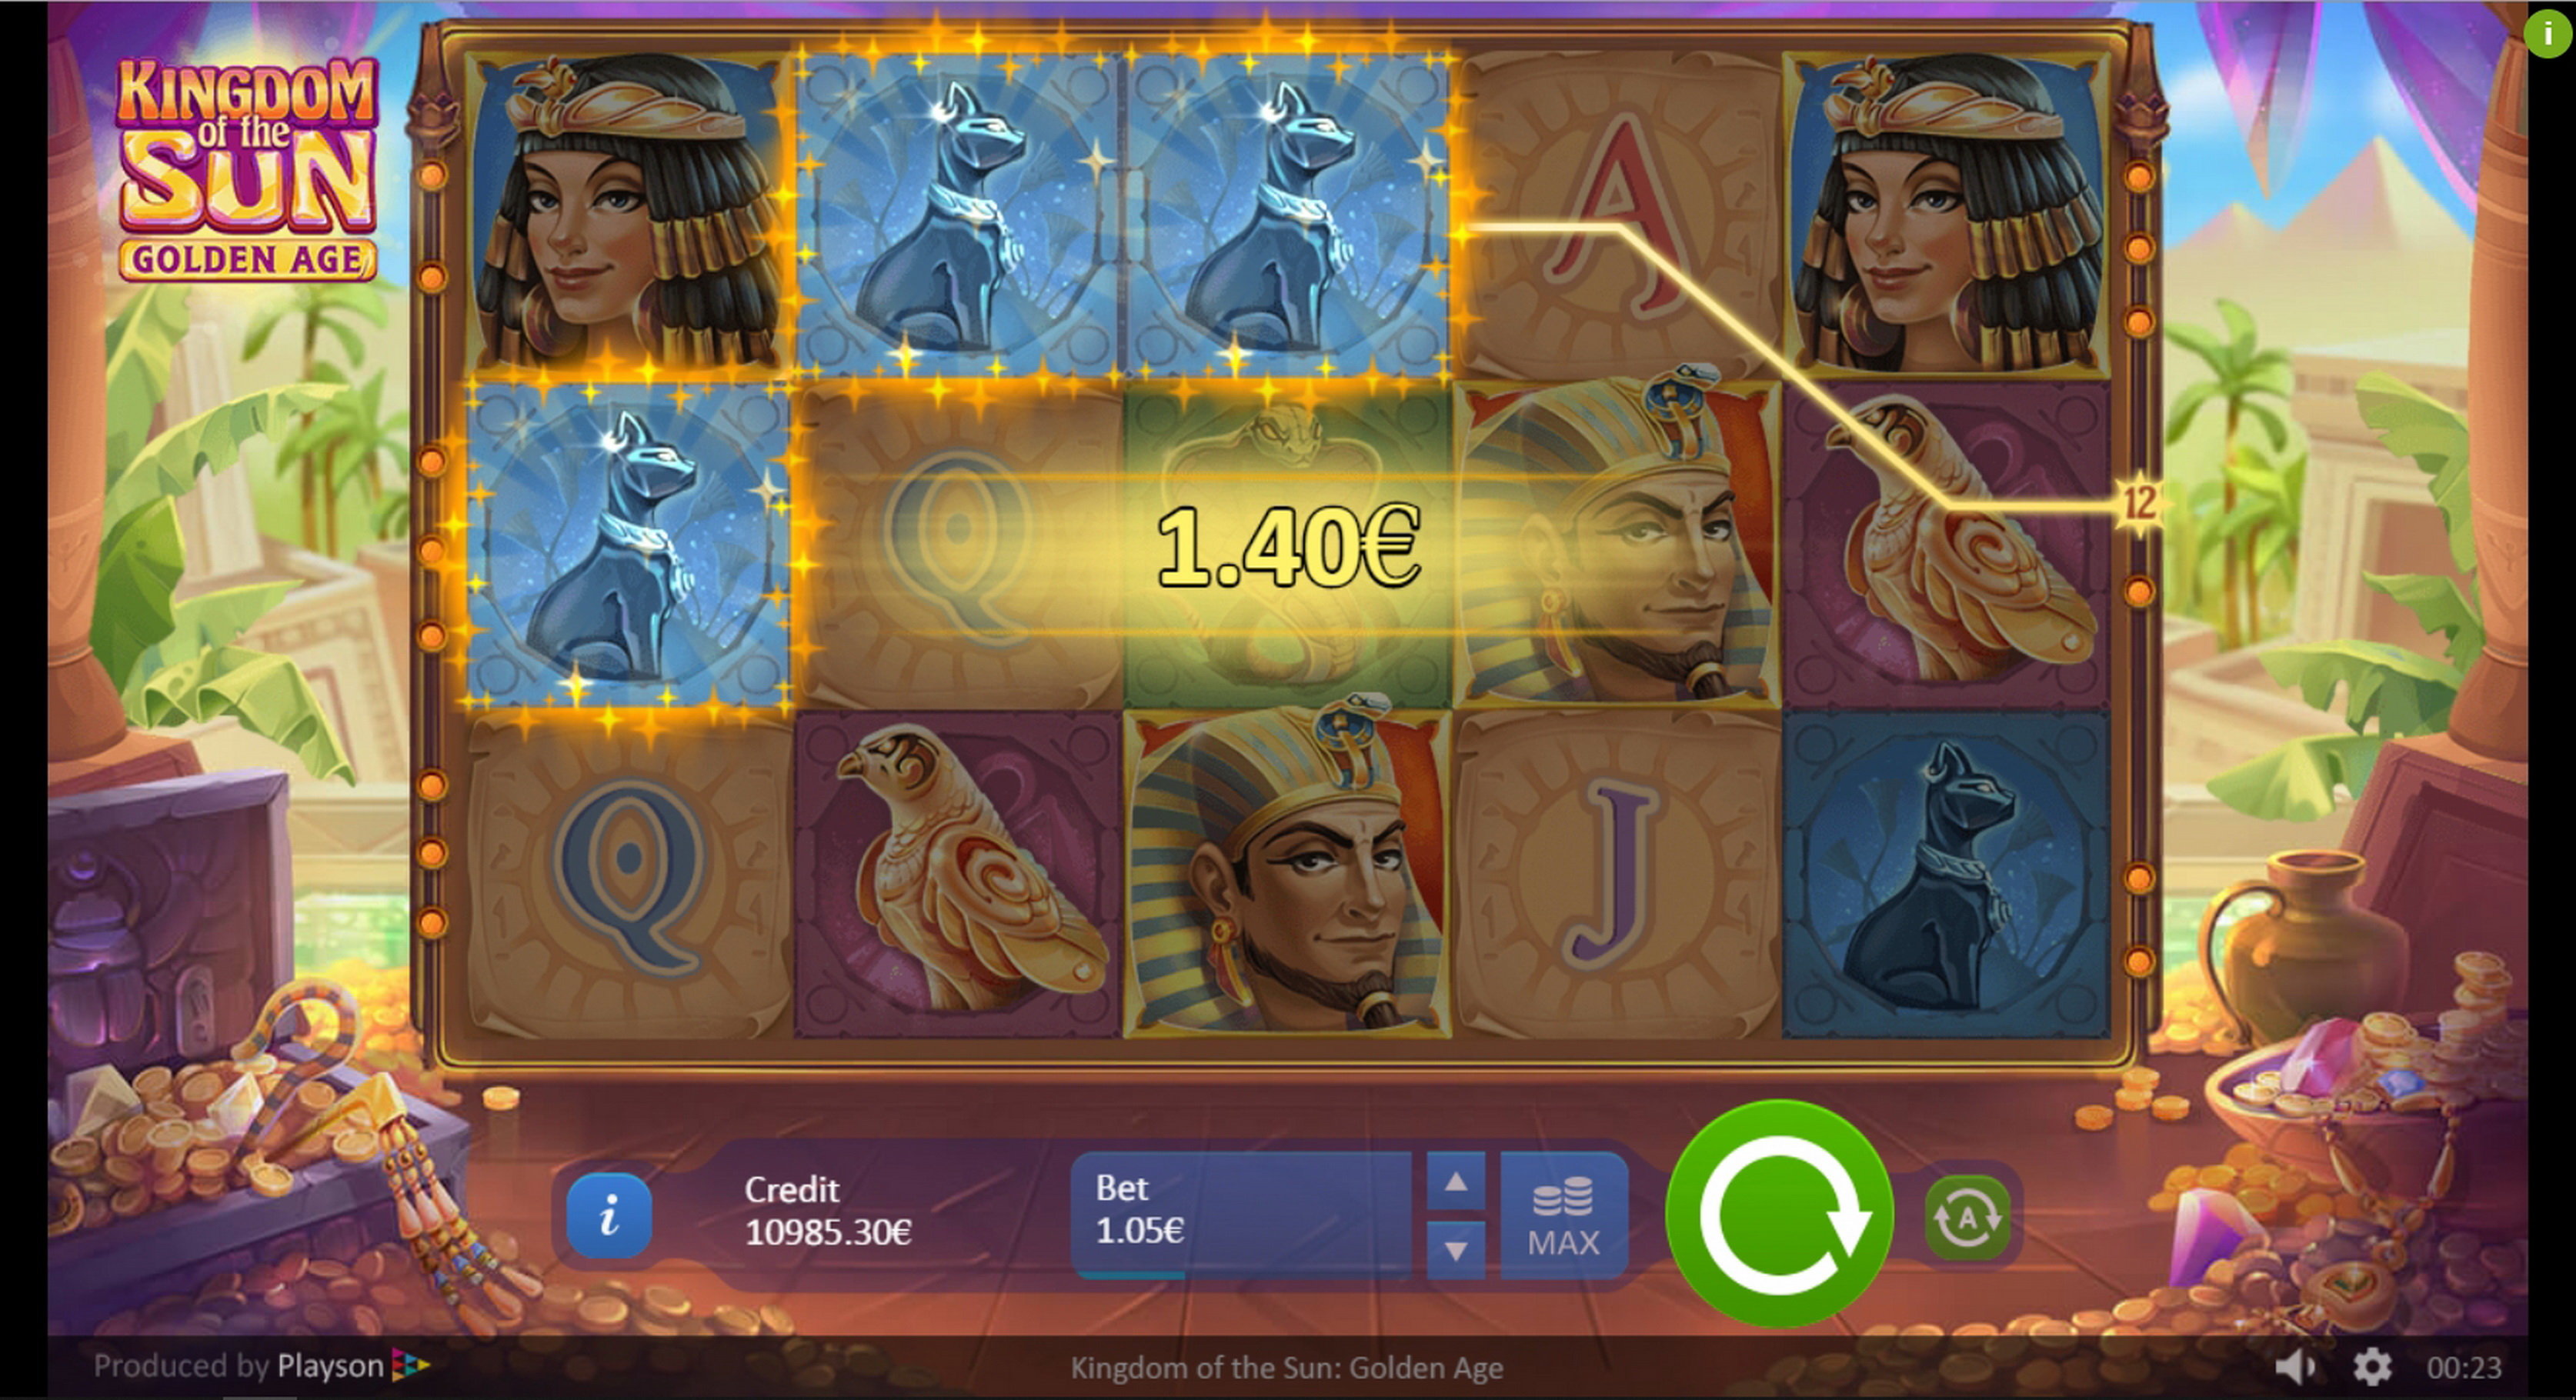 Win Money in Kingdom of the Sun: Golden Age Free Slot Game by Playson